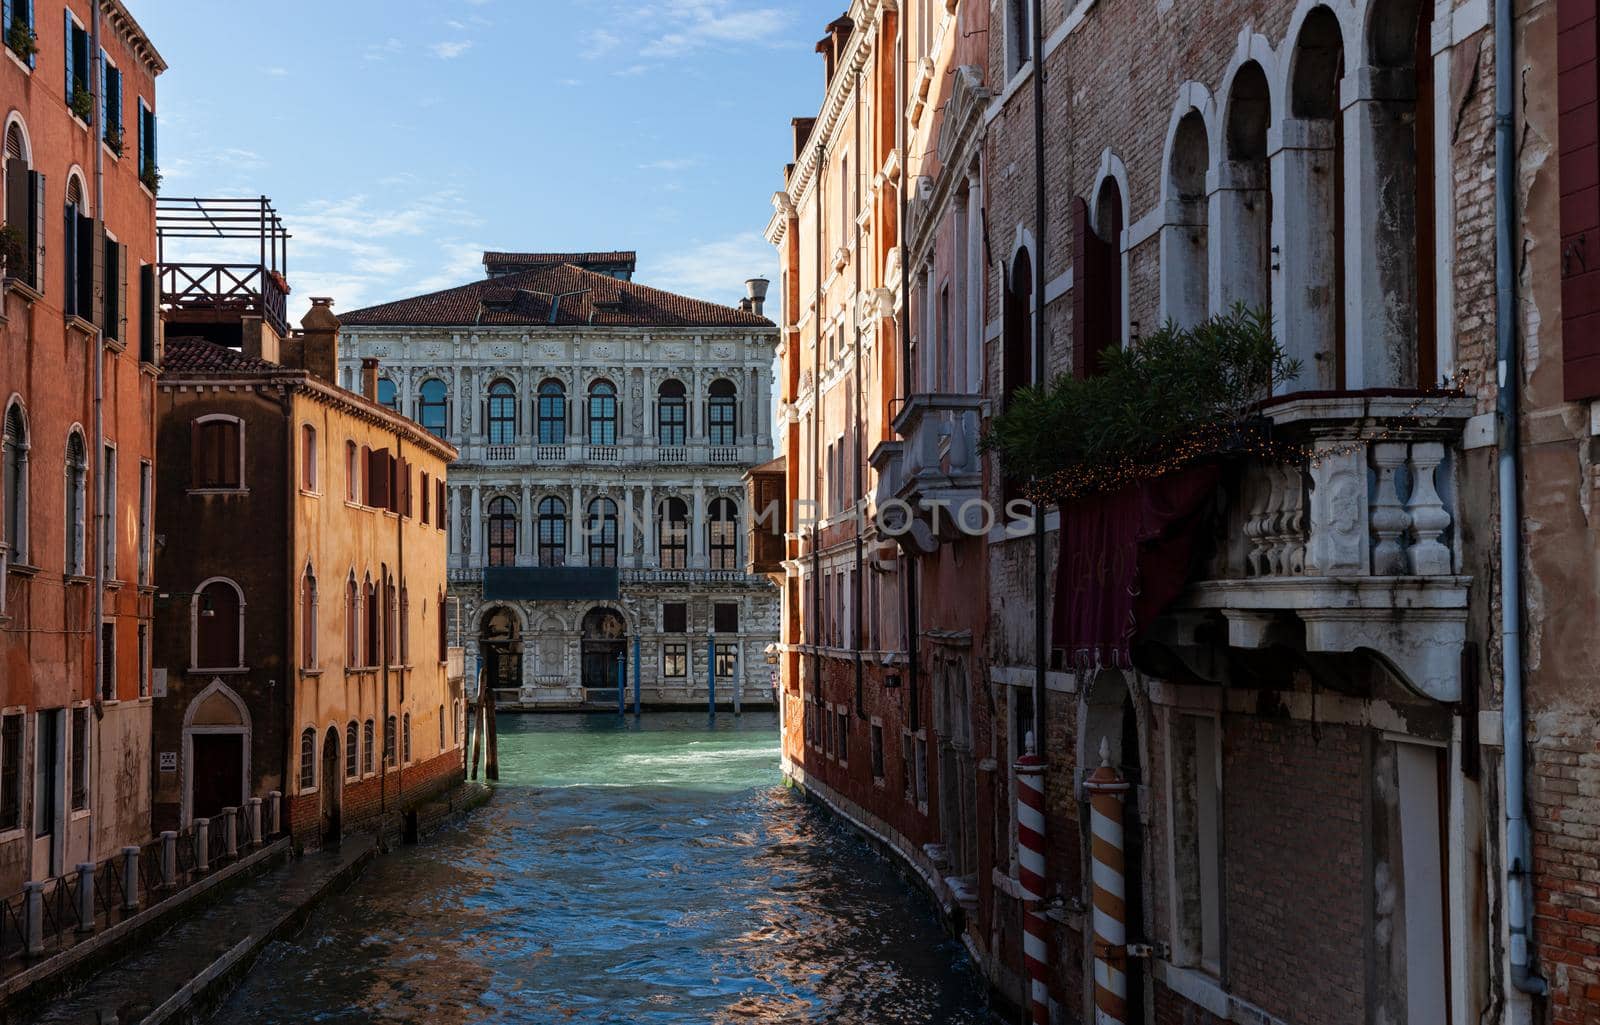 View of the Cà Pesaro, a famous historic building in Venice in Italy by bepsimage